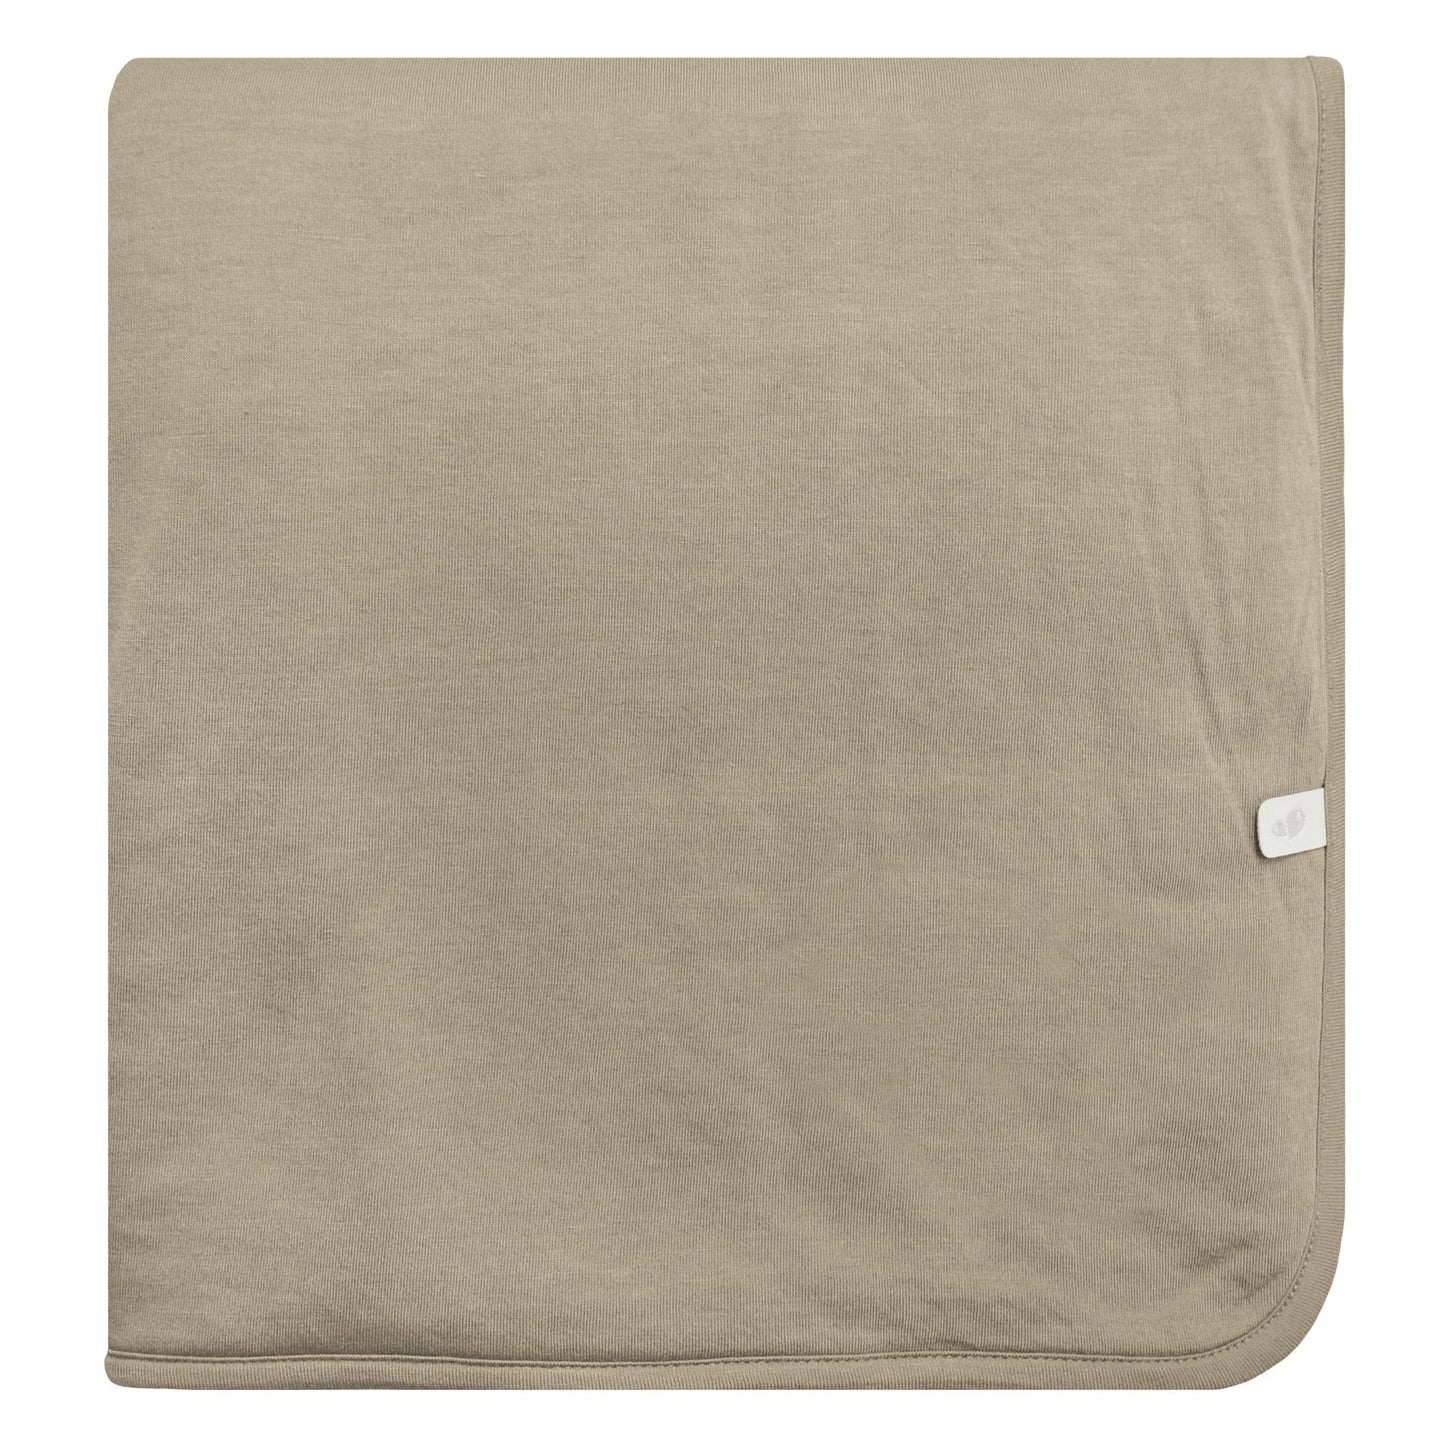 Bamboo blanket - Taupe